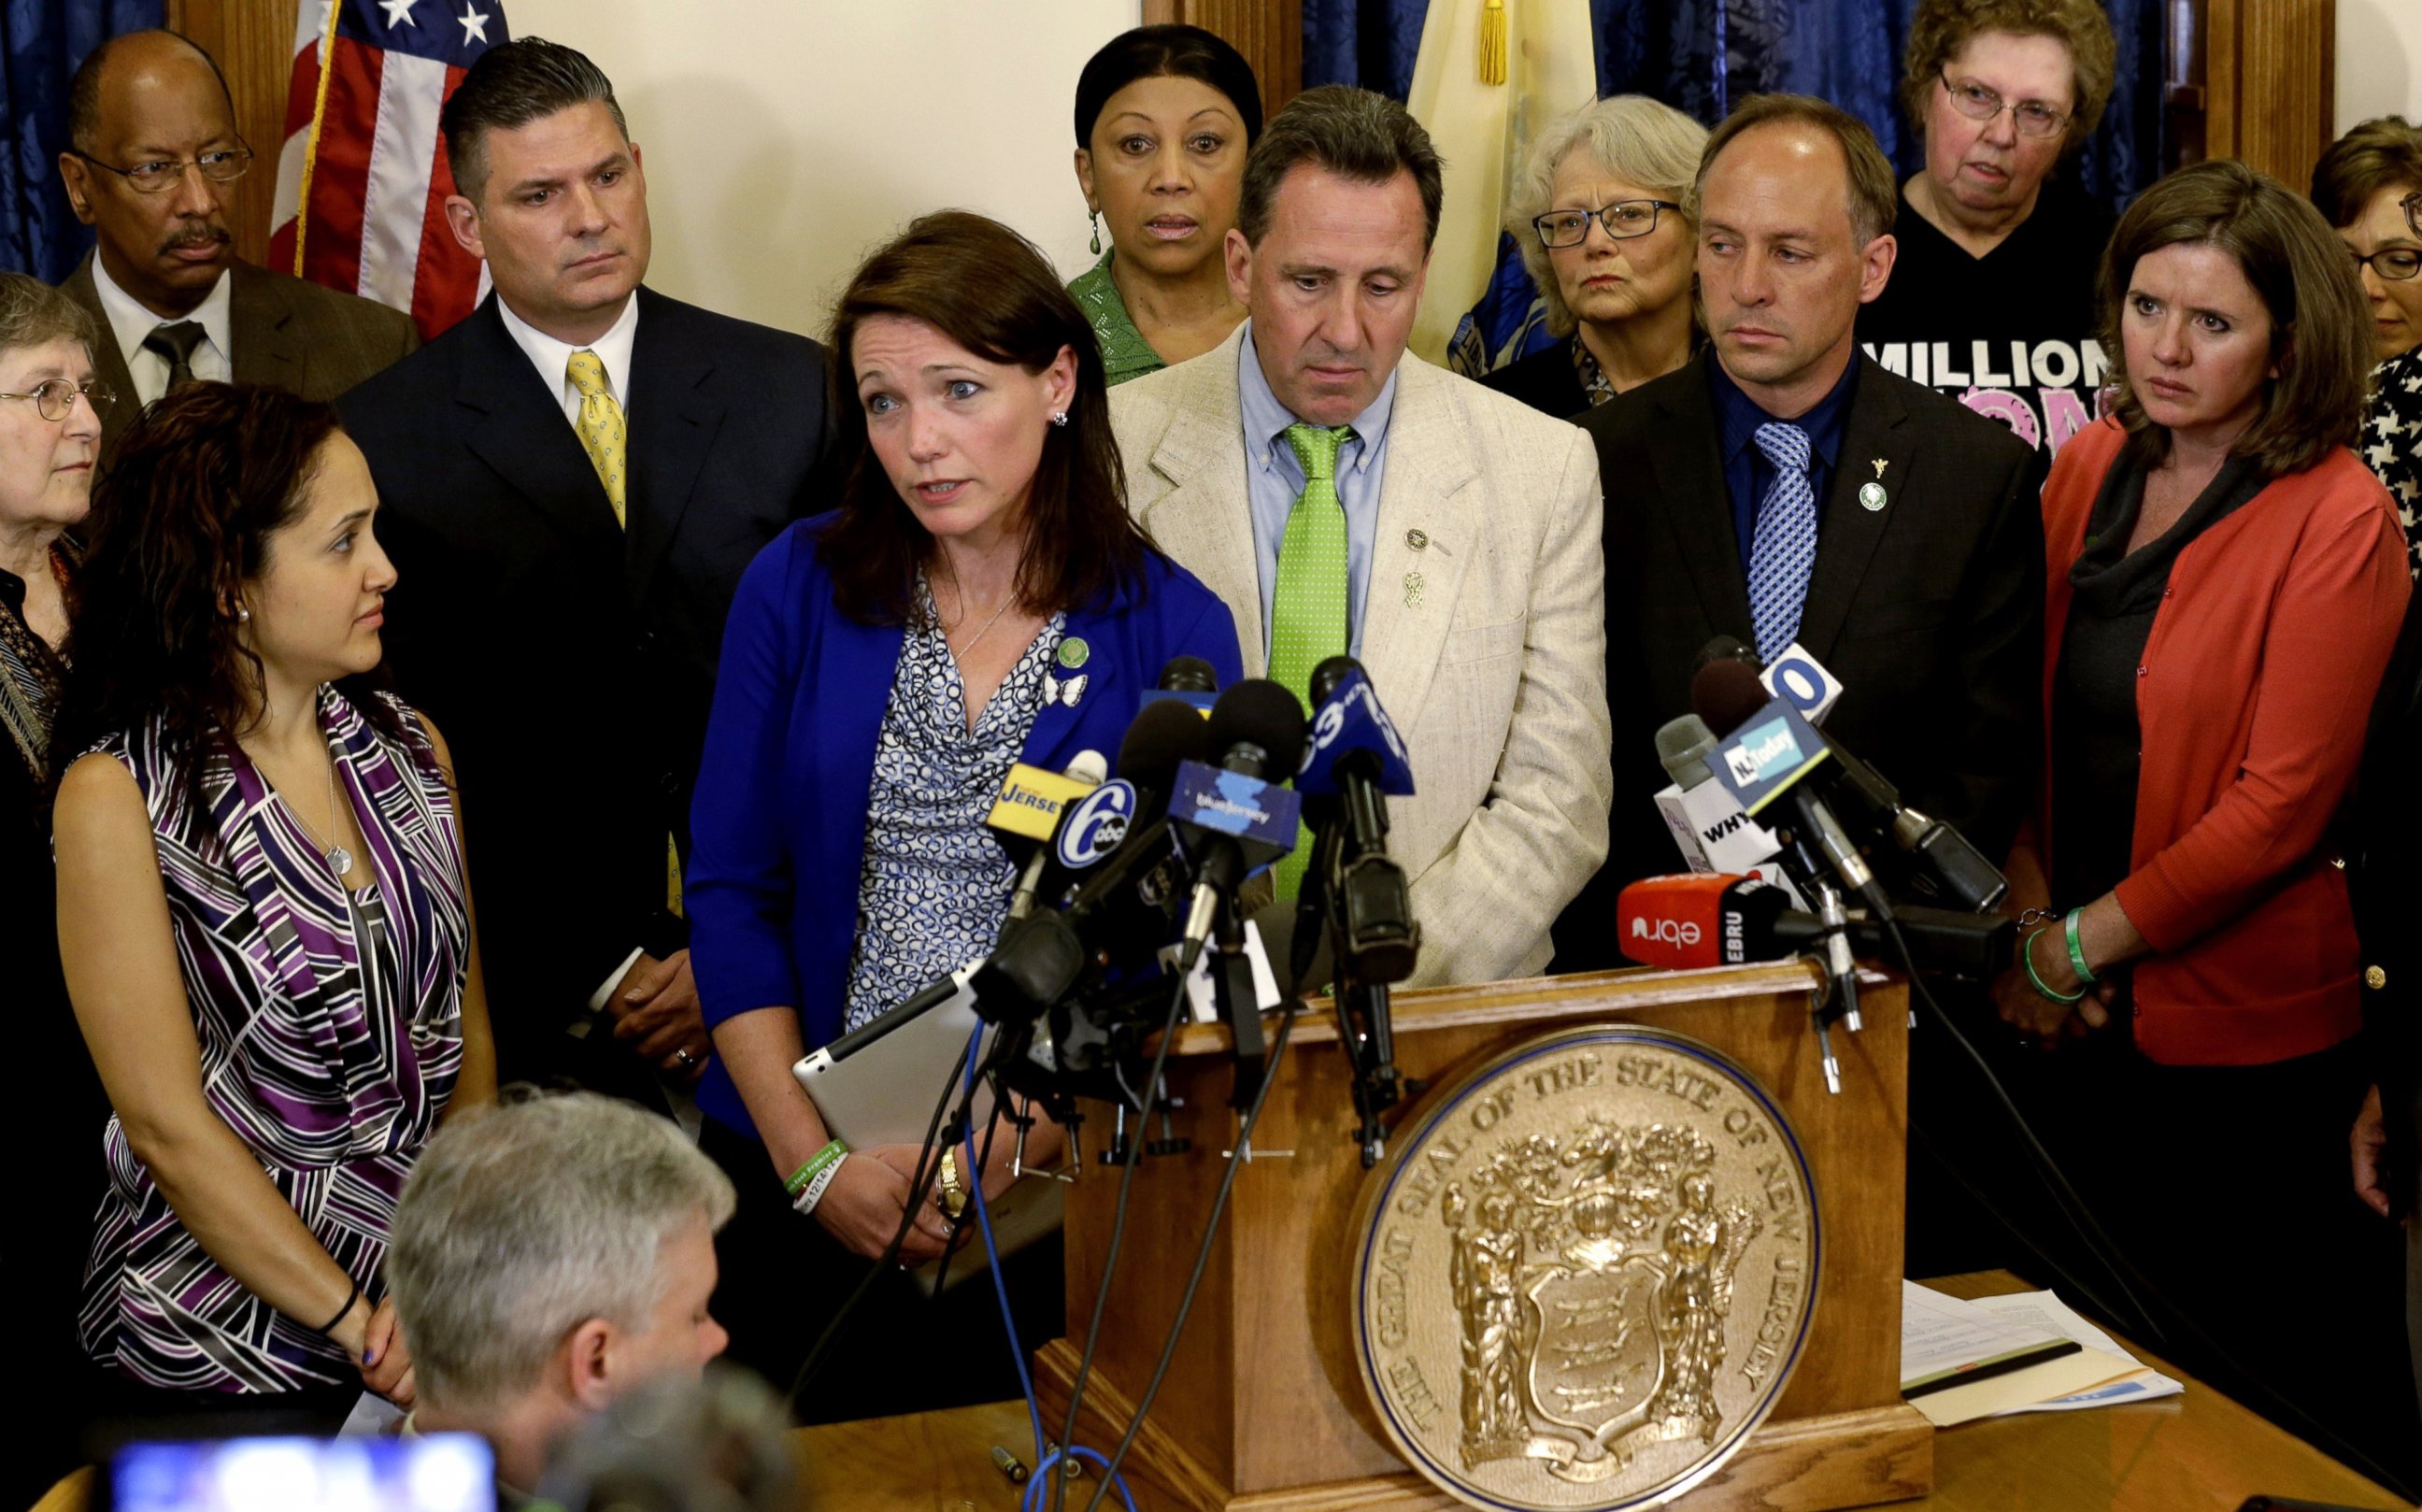 PHOTO: Nicole Hockley, and other parents of victims of the Sandy Hook elementary school shooting talk to media at the New Jersey Statehouse in Trenton, April 30, 2013. 